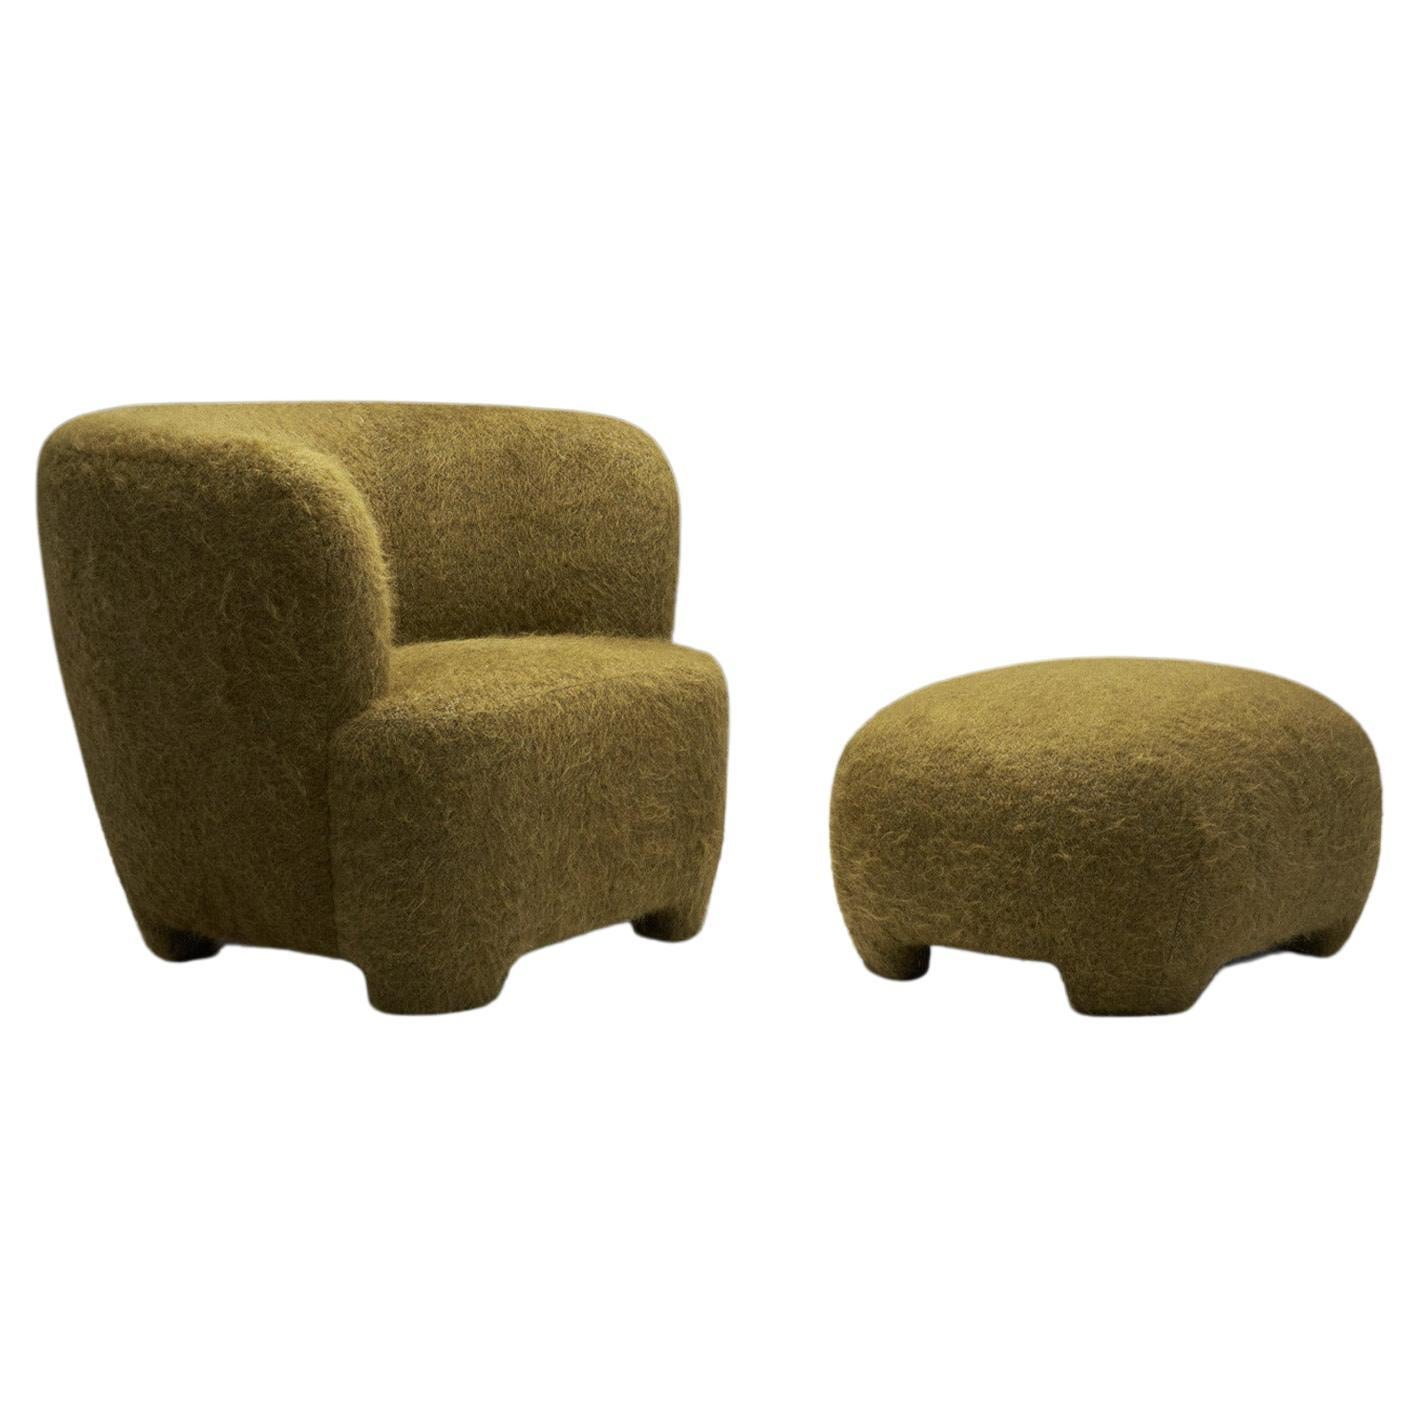 Danish Cabinetmaker Lounge Chair in Wool with Footstool, Denmark, circa 1940s For Sale